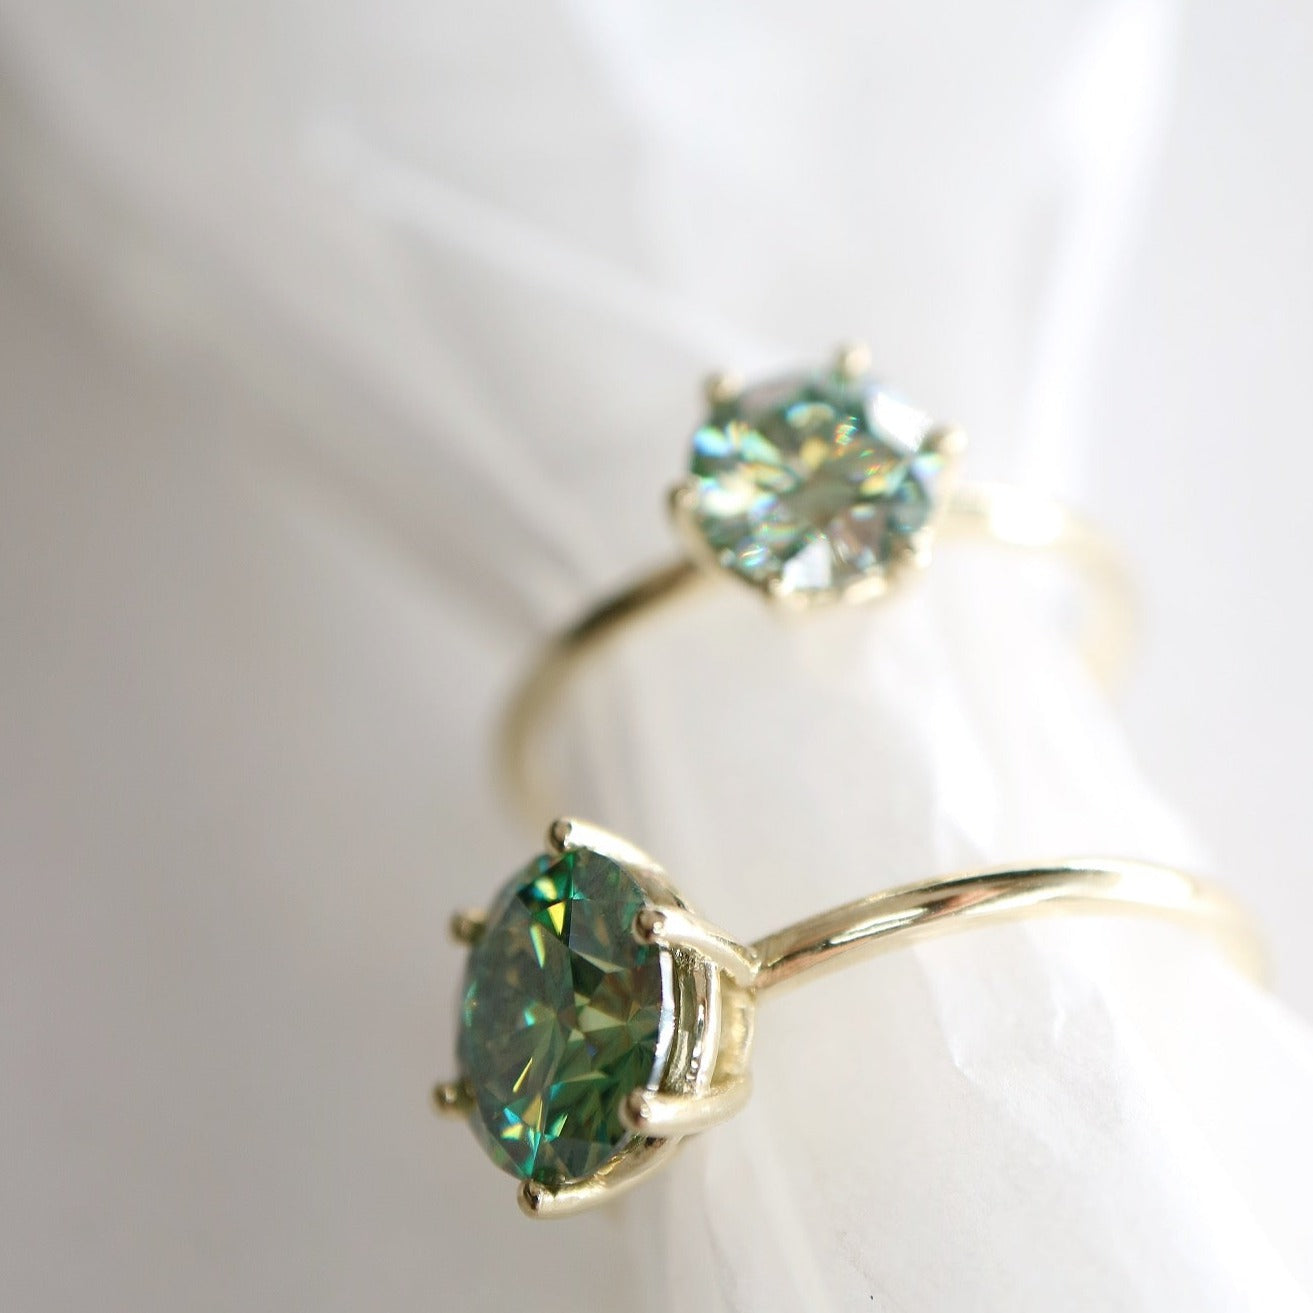 Solid gold and blue moissanite rings